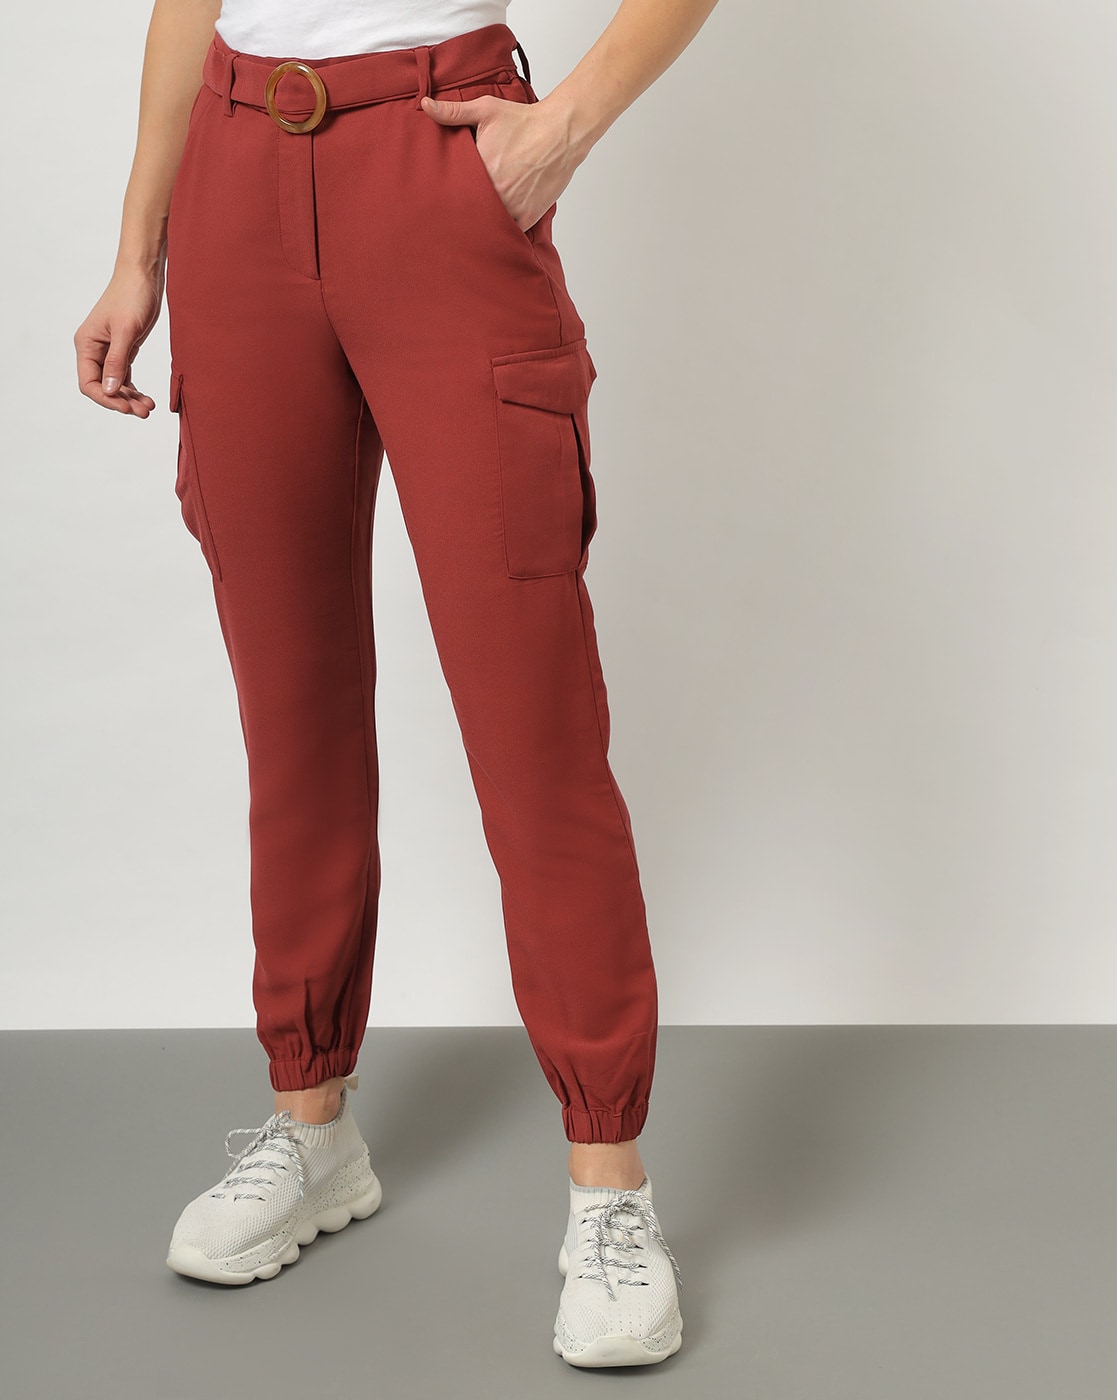 Urban Renewal Remade Red Overdyed Camo Cargo Trousers  Urban Outfitters UK